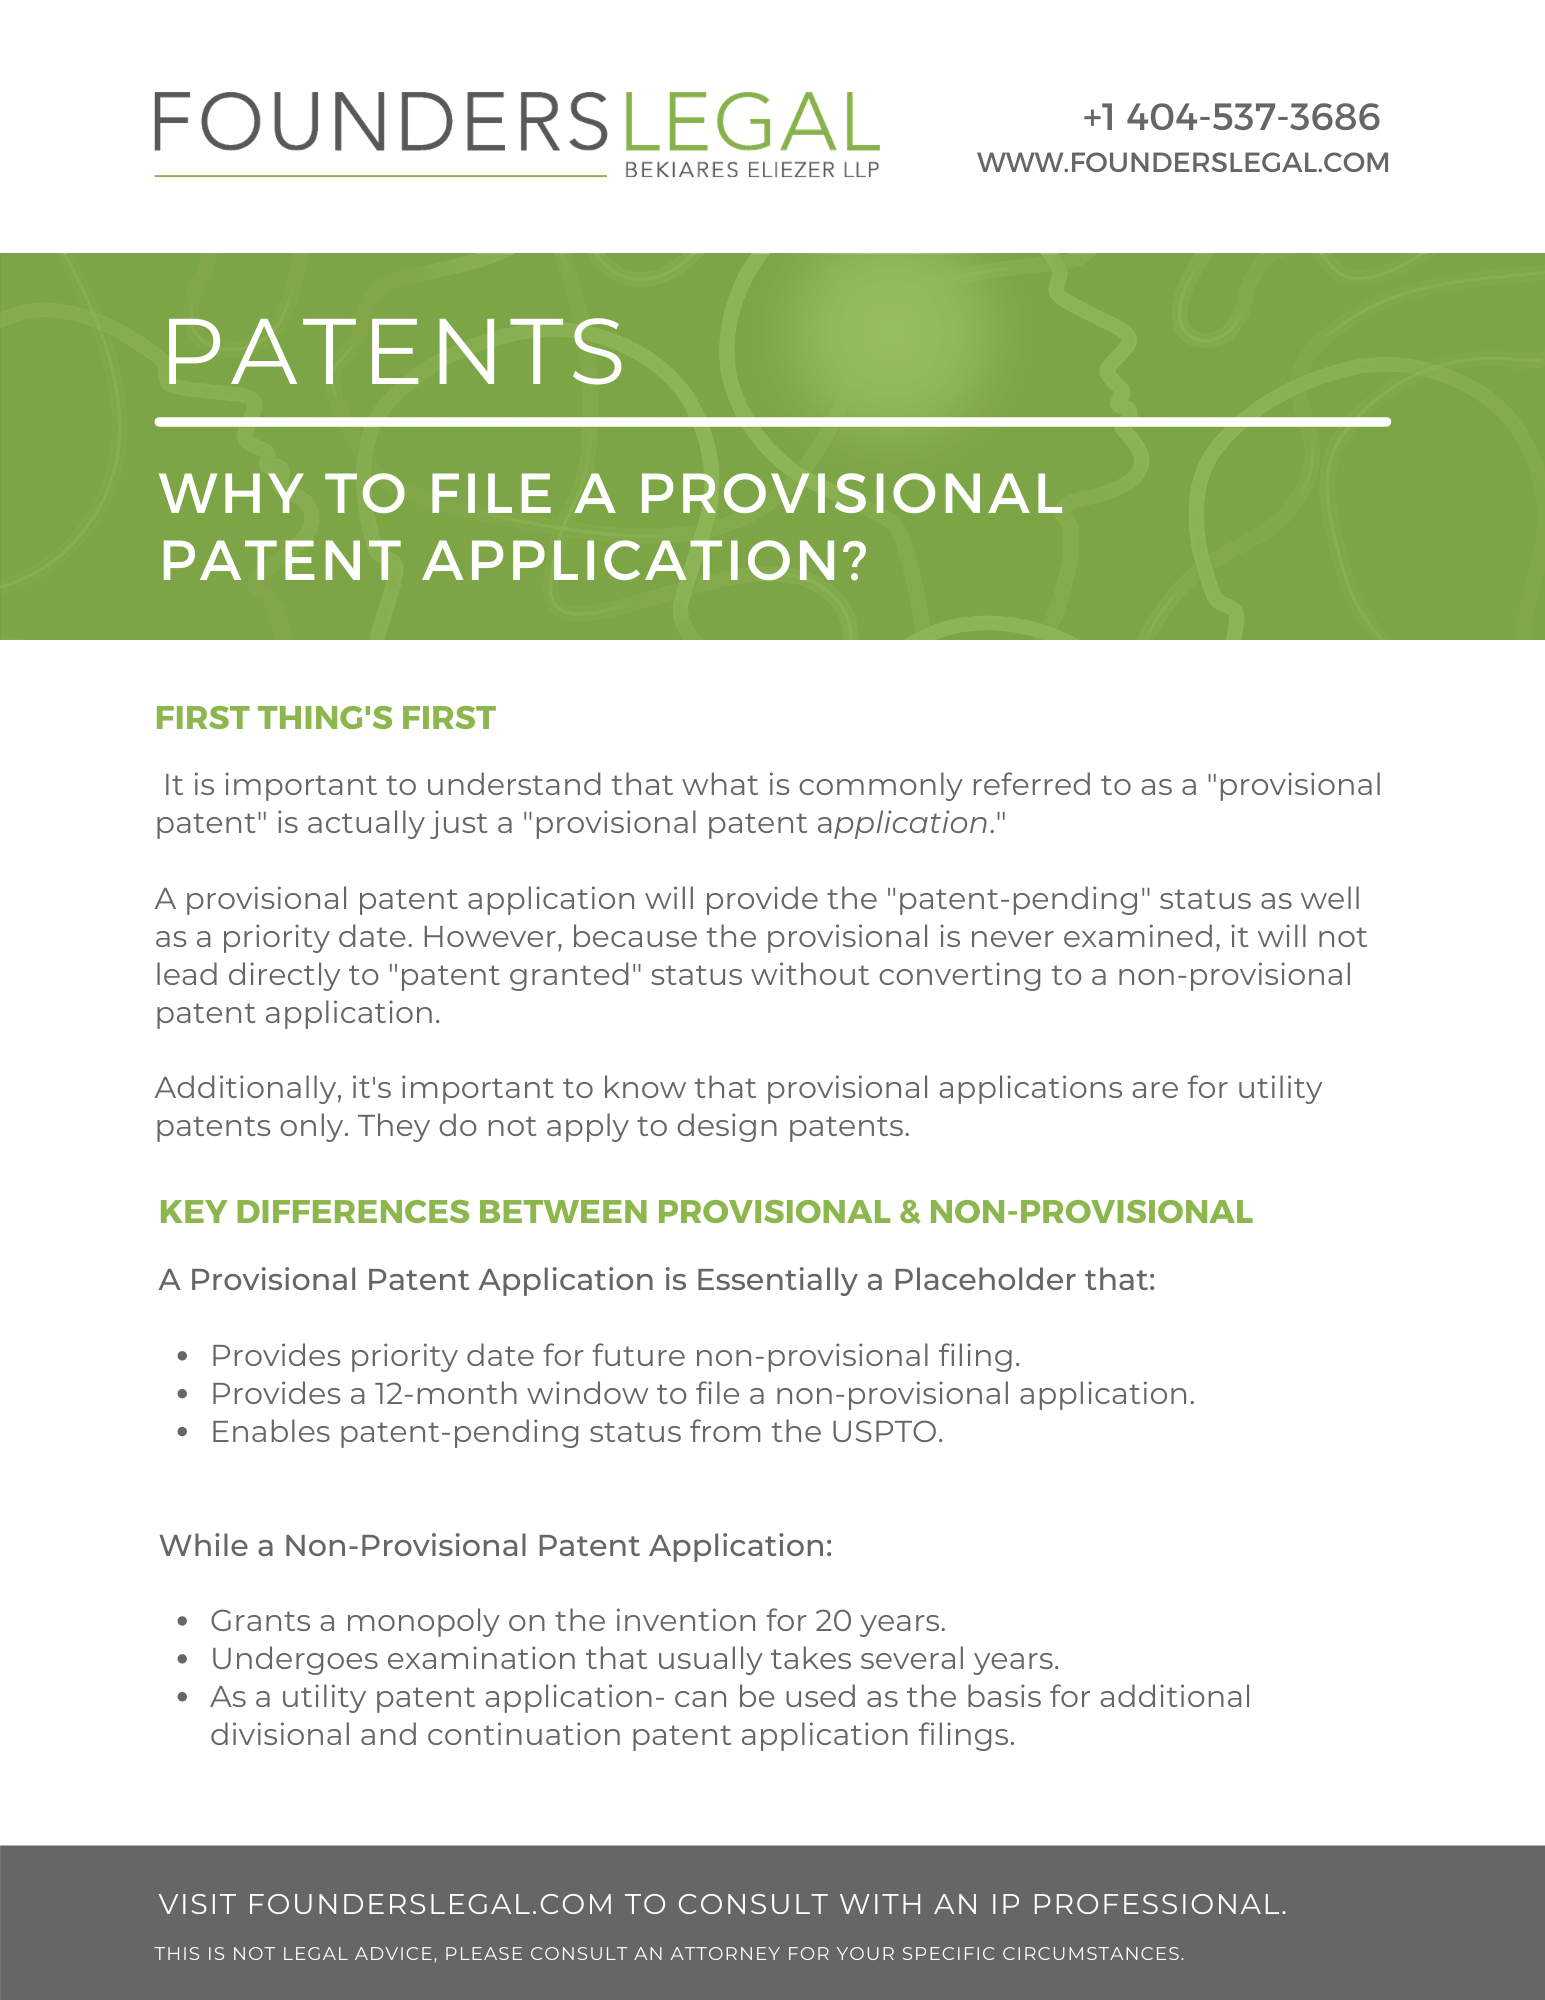 Reasons to File a Provisional Patent Application Guide - Page 01